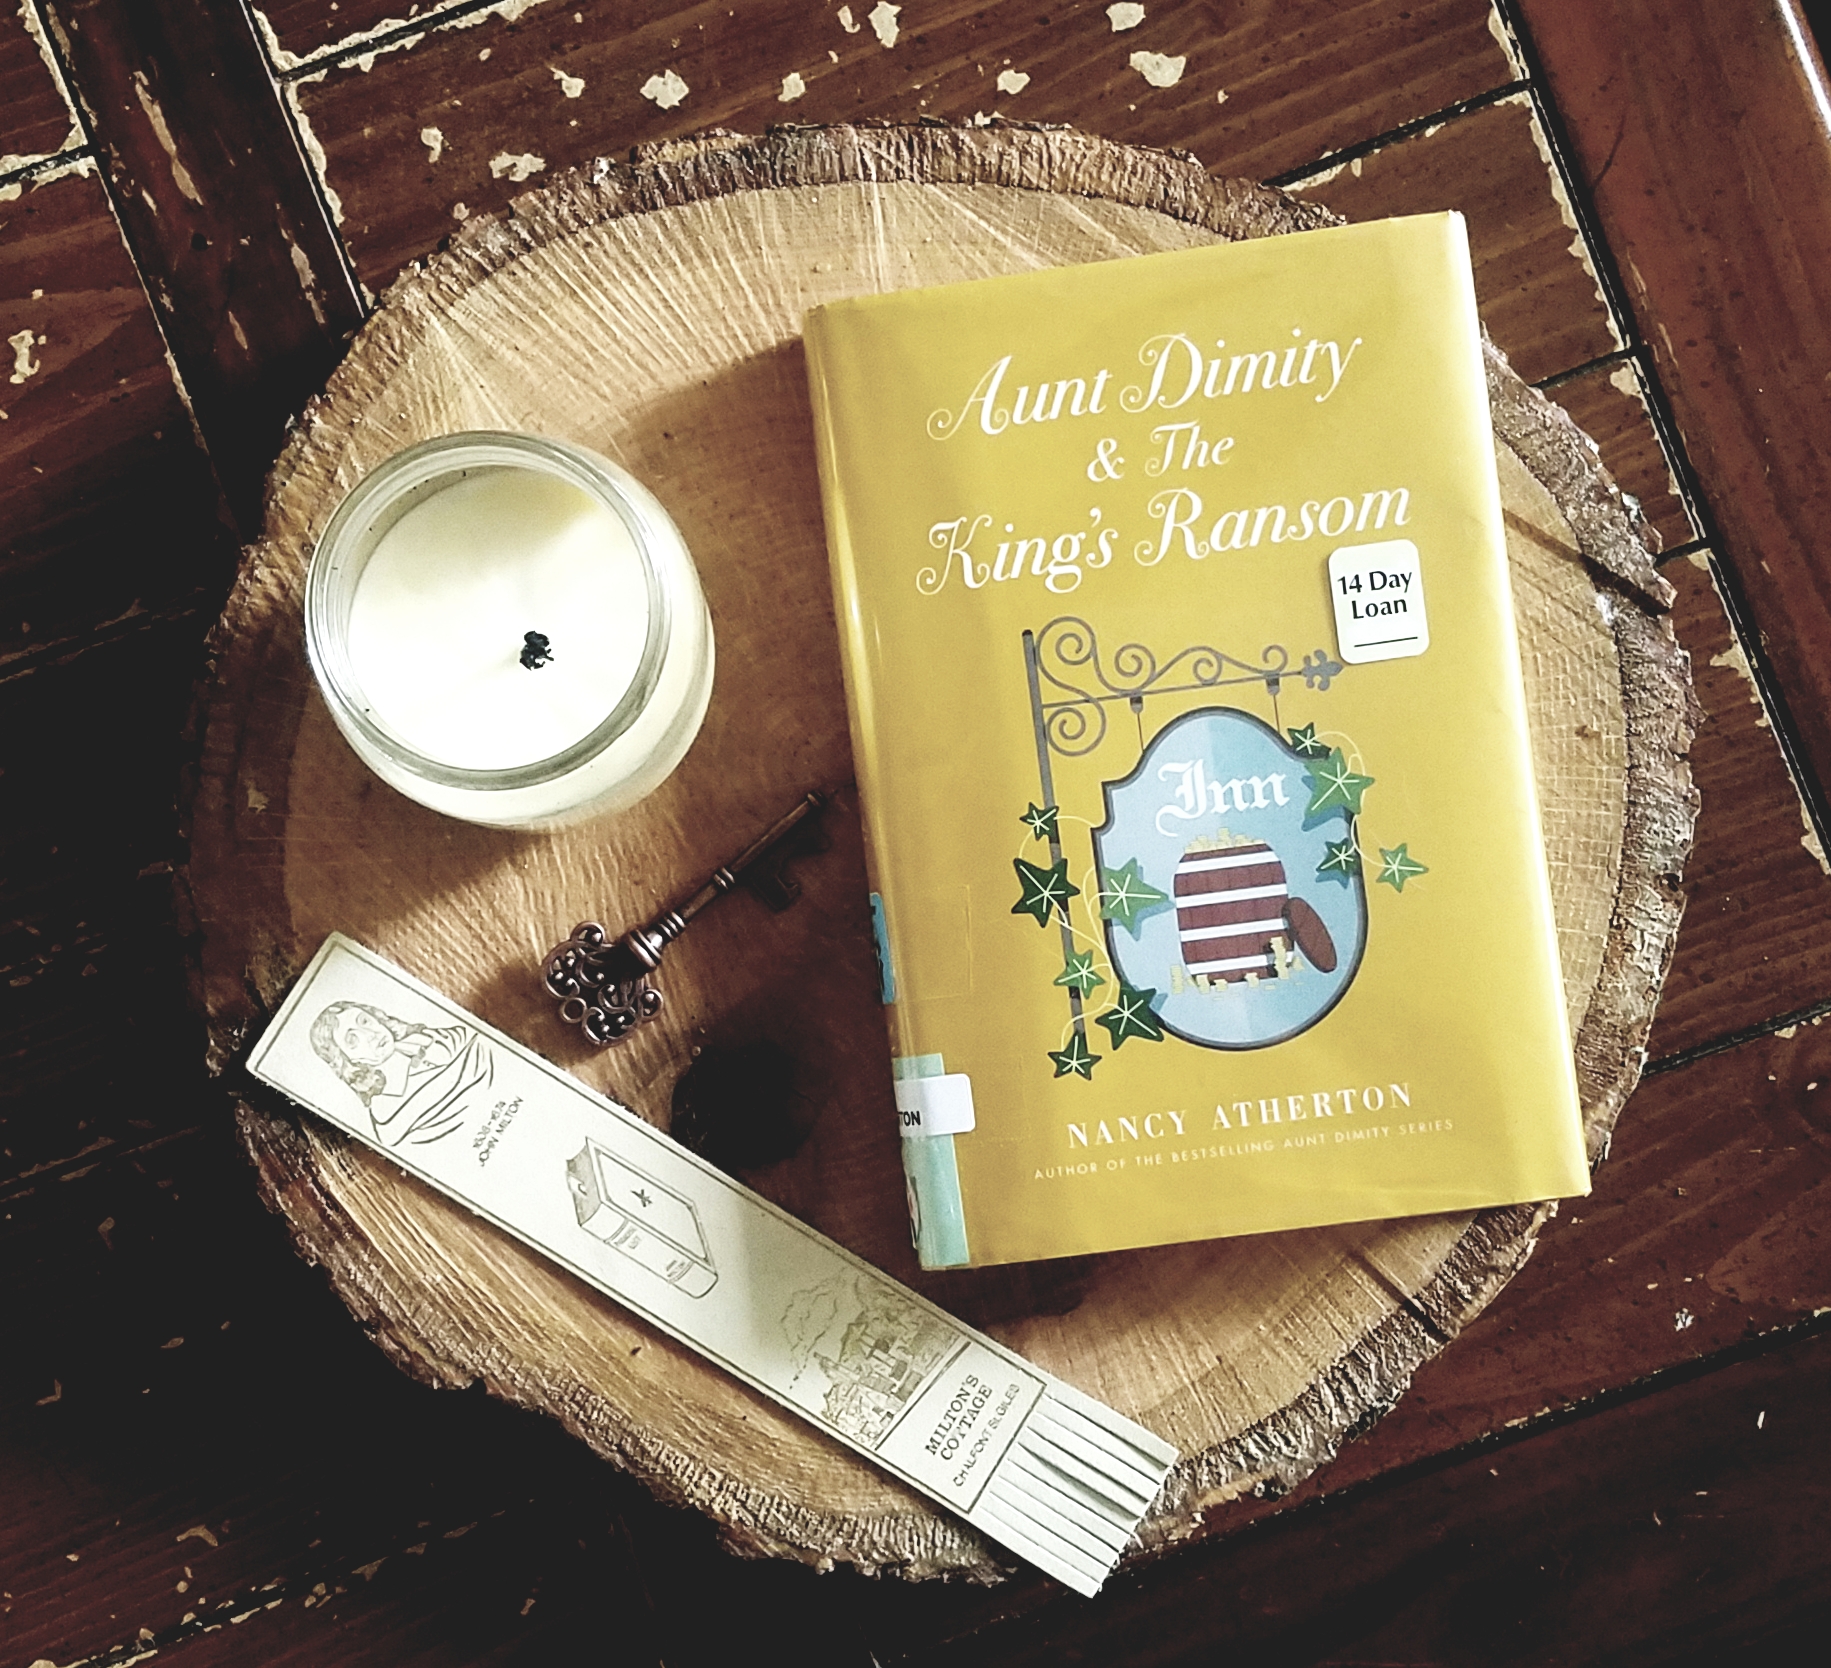 Flat lay of Aunt Dimity and the King's Ransom book